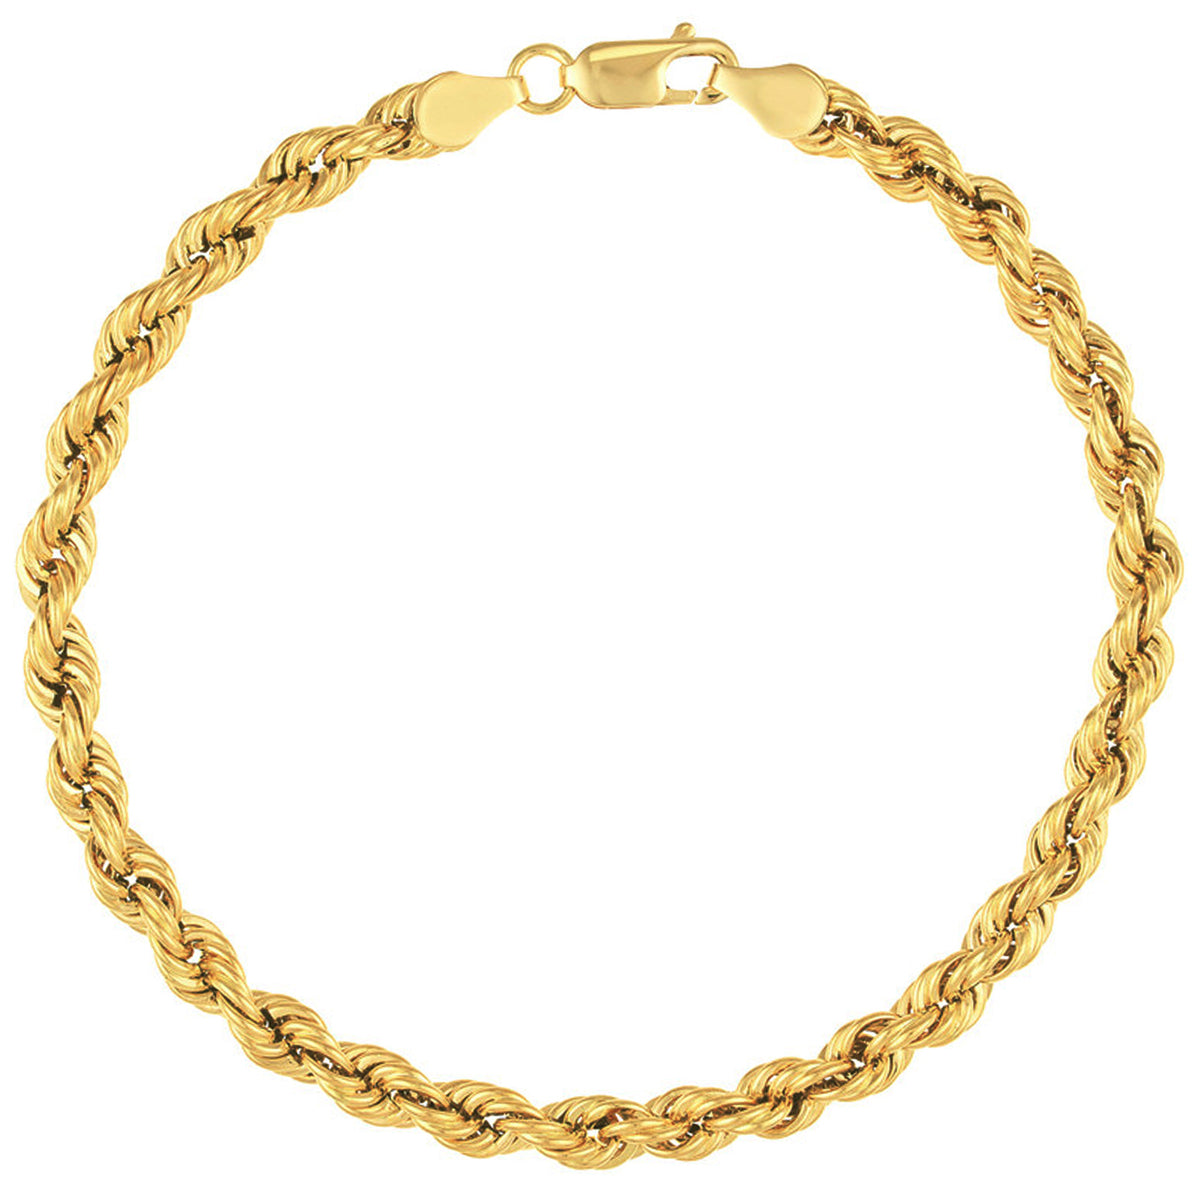 14k Yellow Gold Hollow 5mm Rope Chain Bracelet with Lobster Lock - Light Rope Chain Bracelet with Diamond Cut